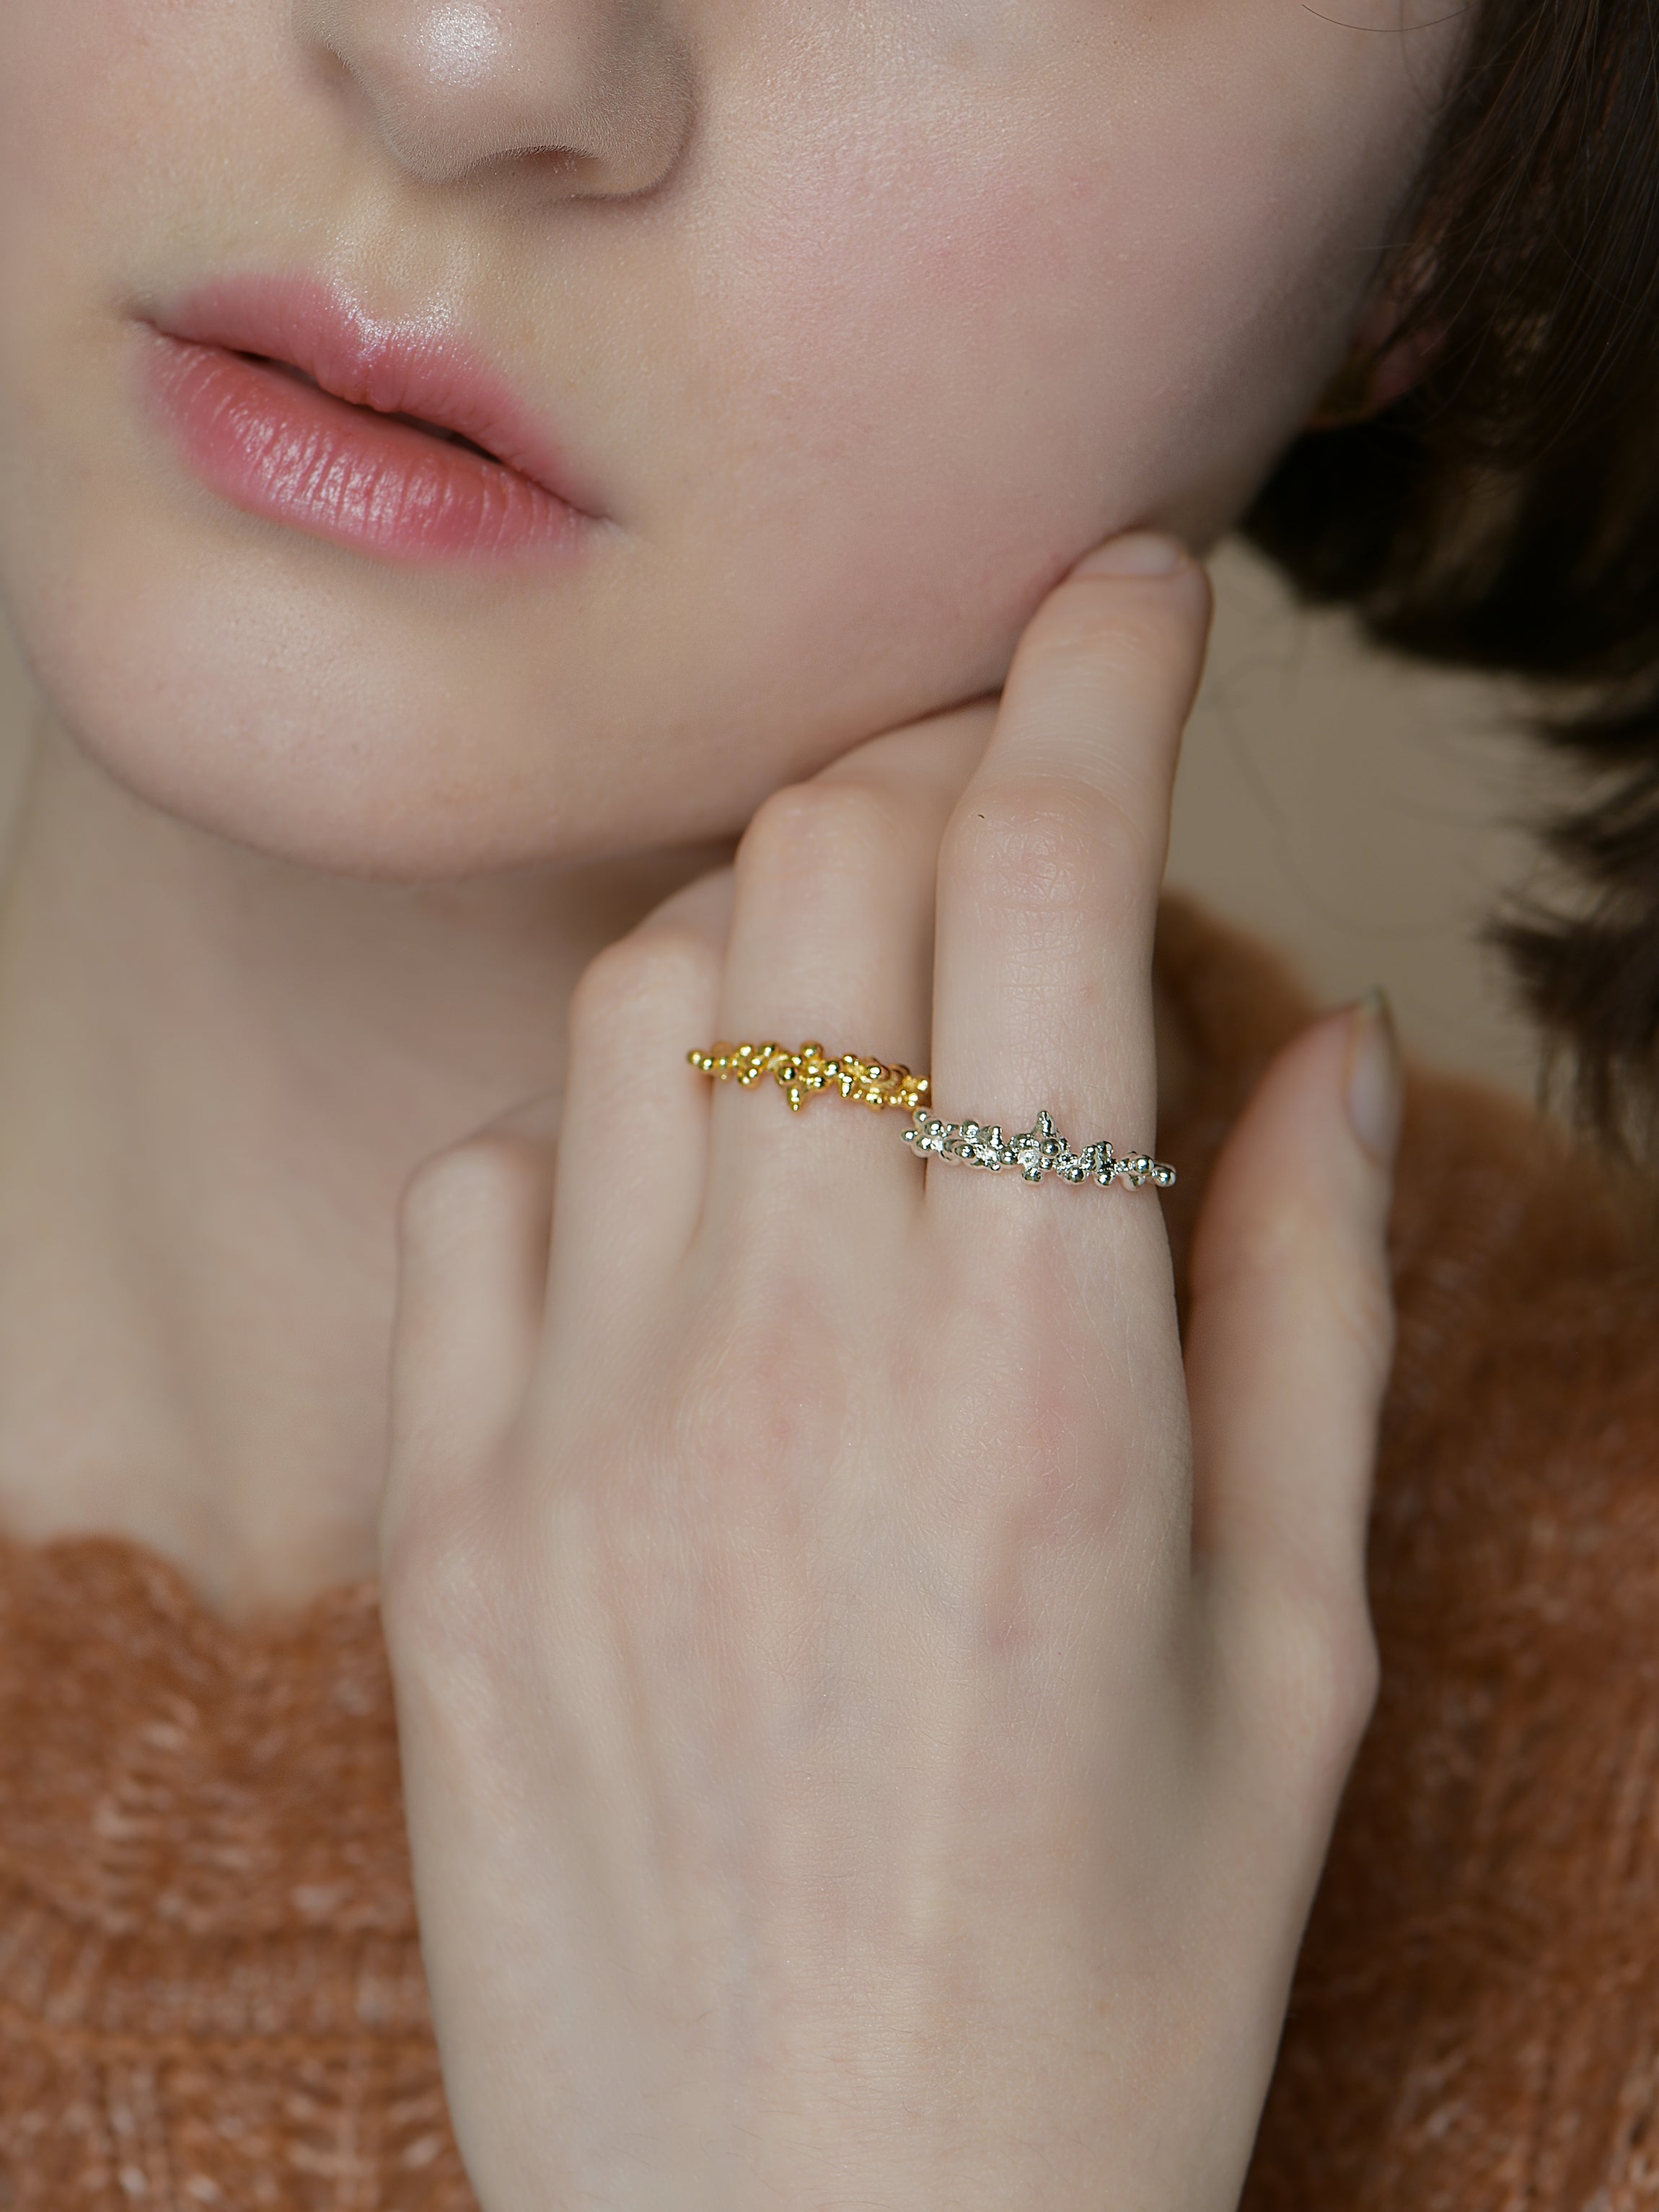 A model wears two rings, one sterling silver and the other a gold vermeil. Both rings have a bubble texture design.